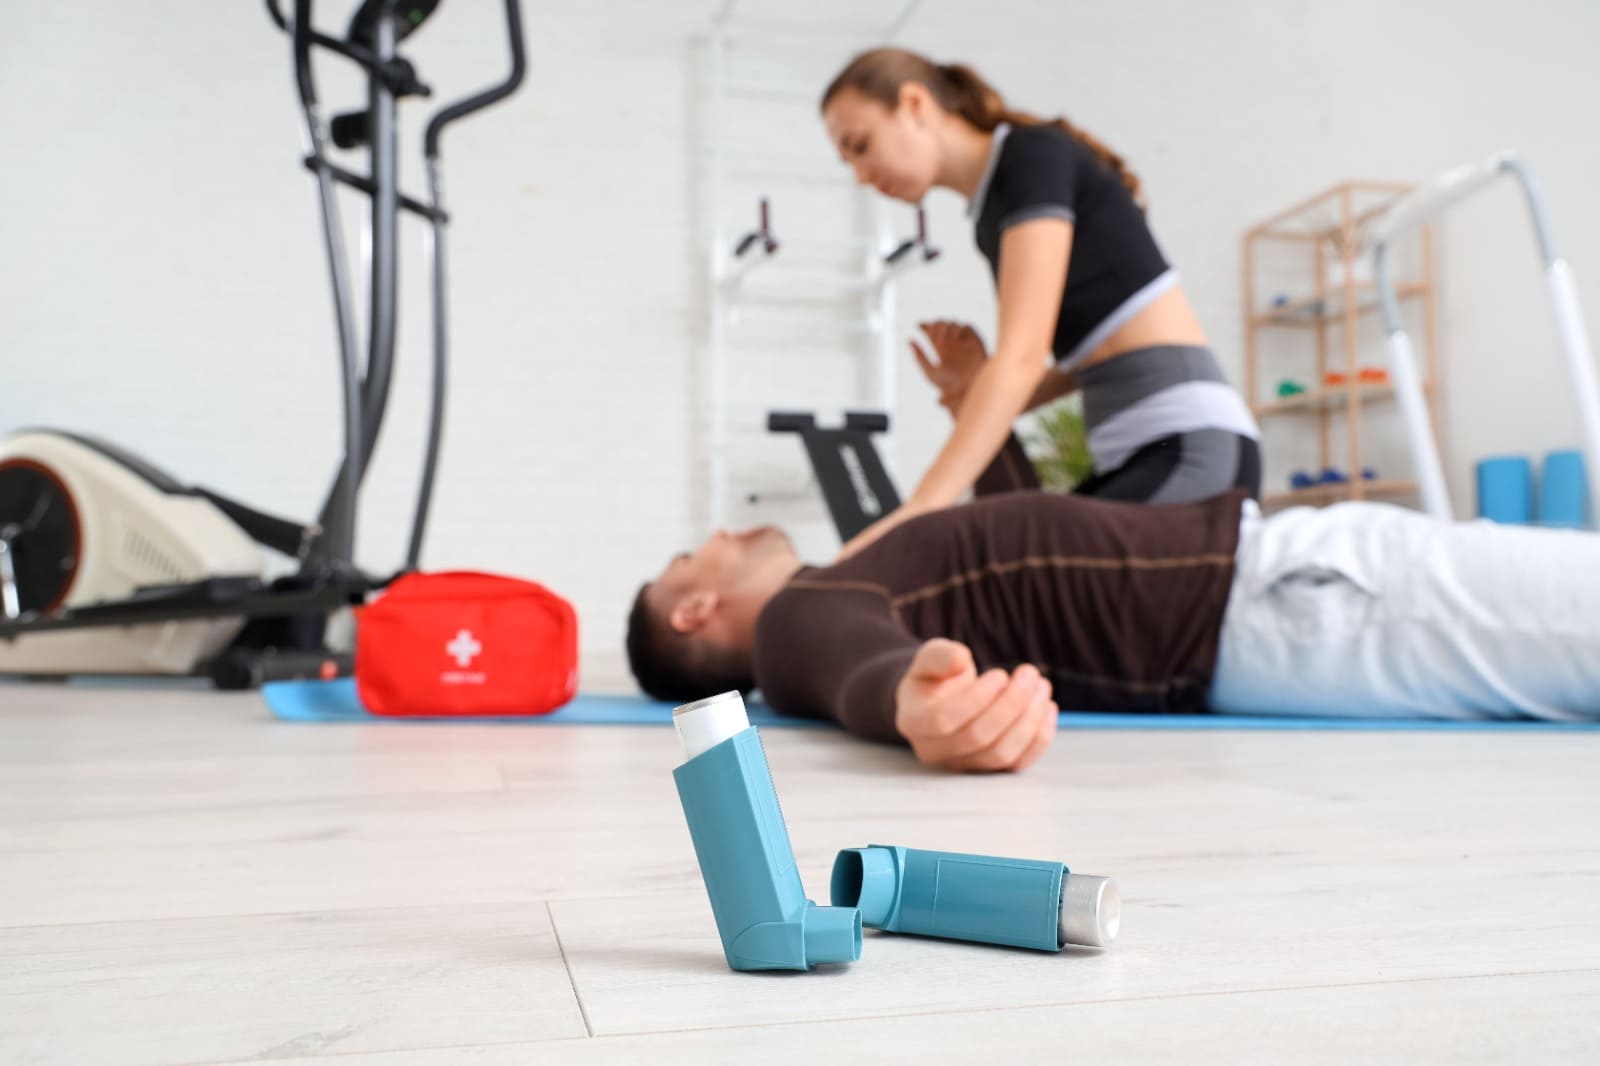 How to choose the right workouts for asthma sufferers